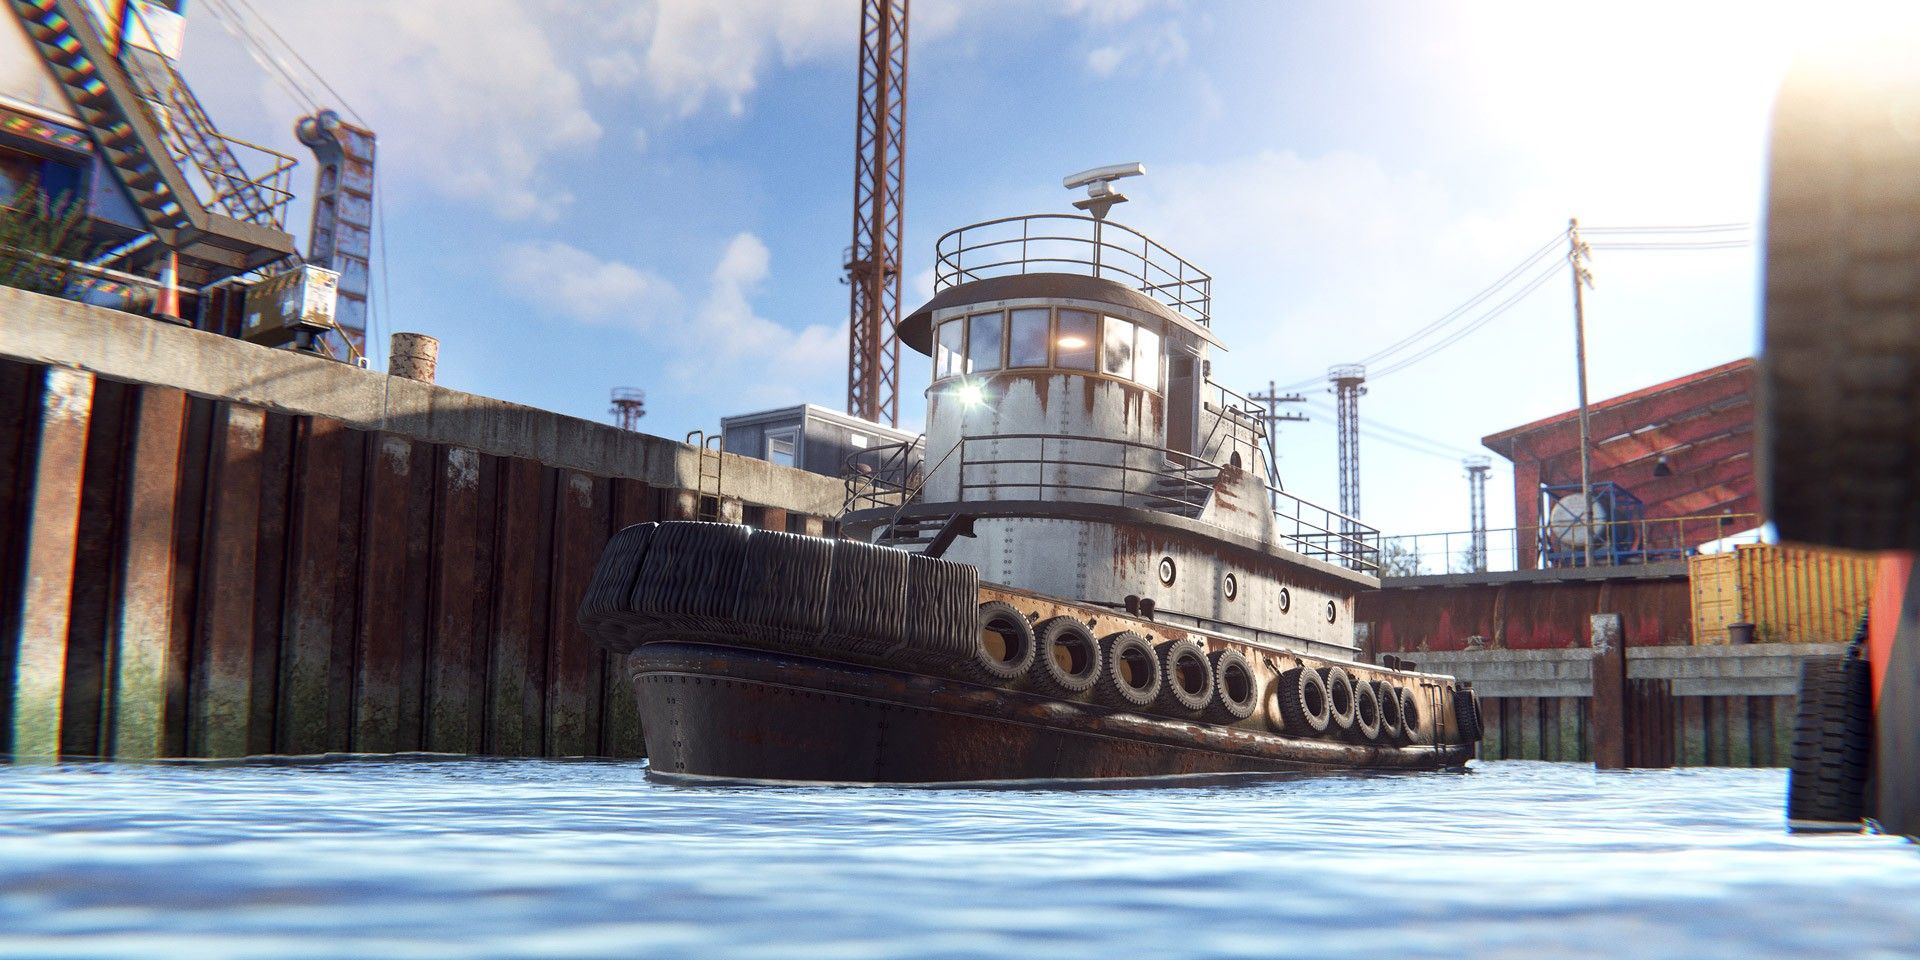 A glamor shot of an old tugboat sitting in the water of a harbor